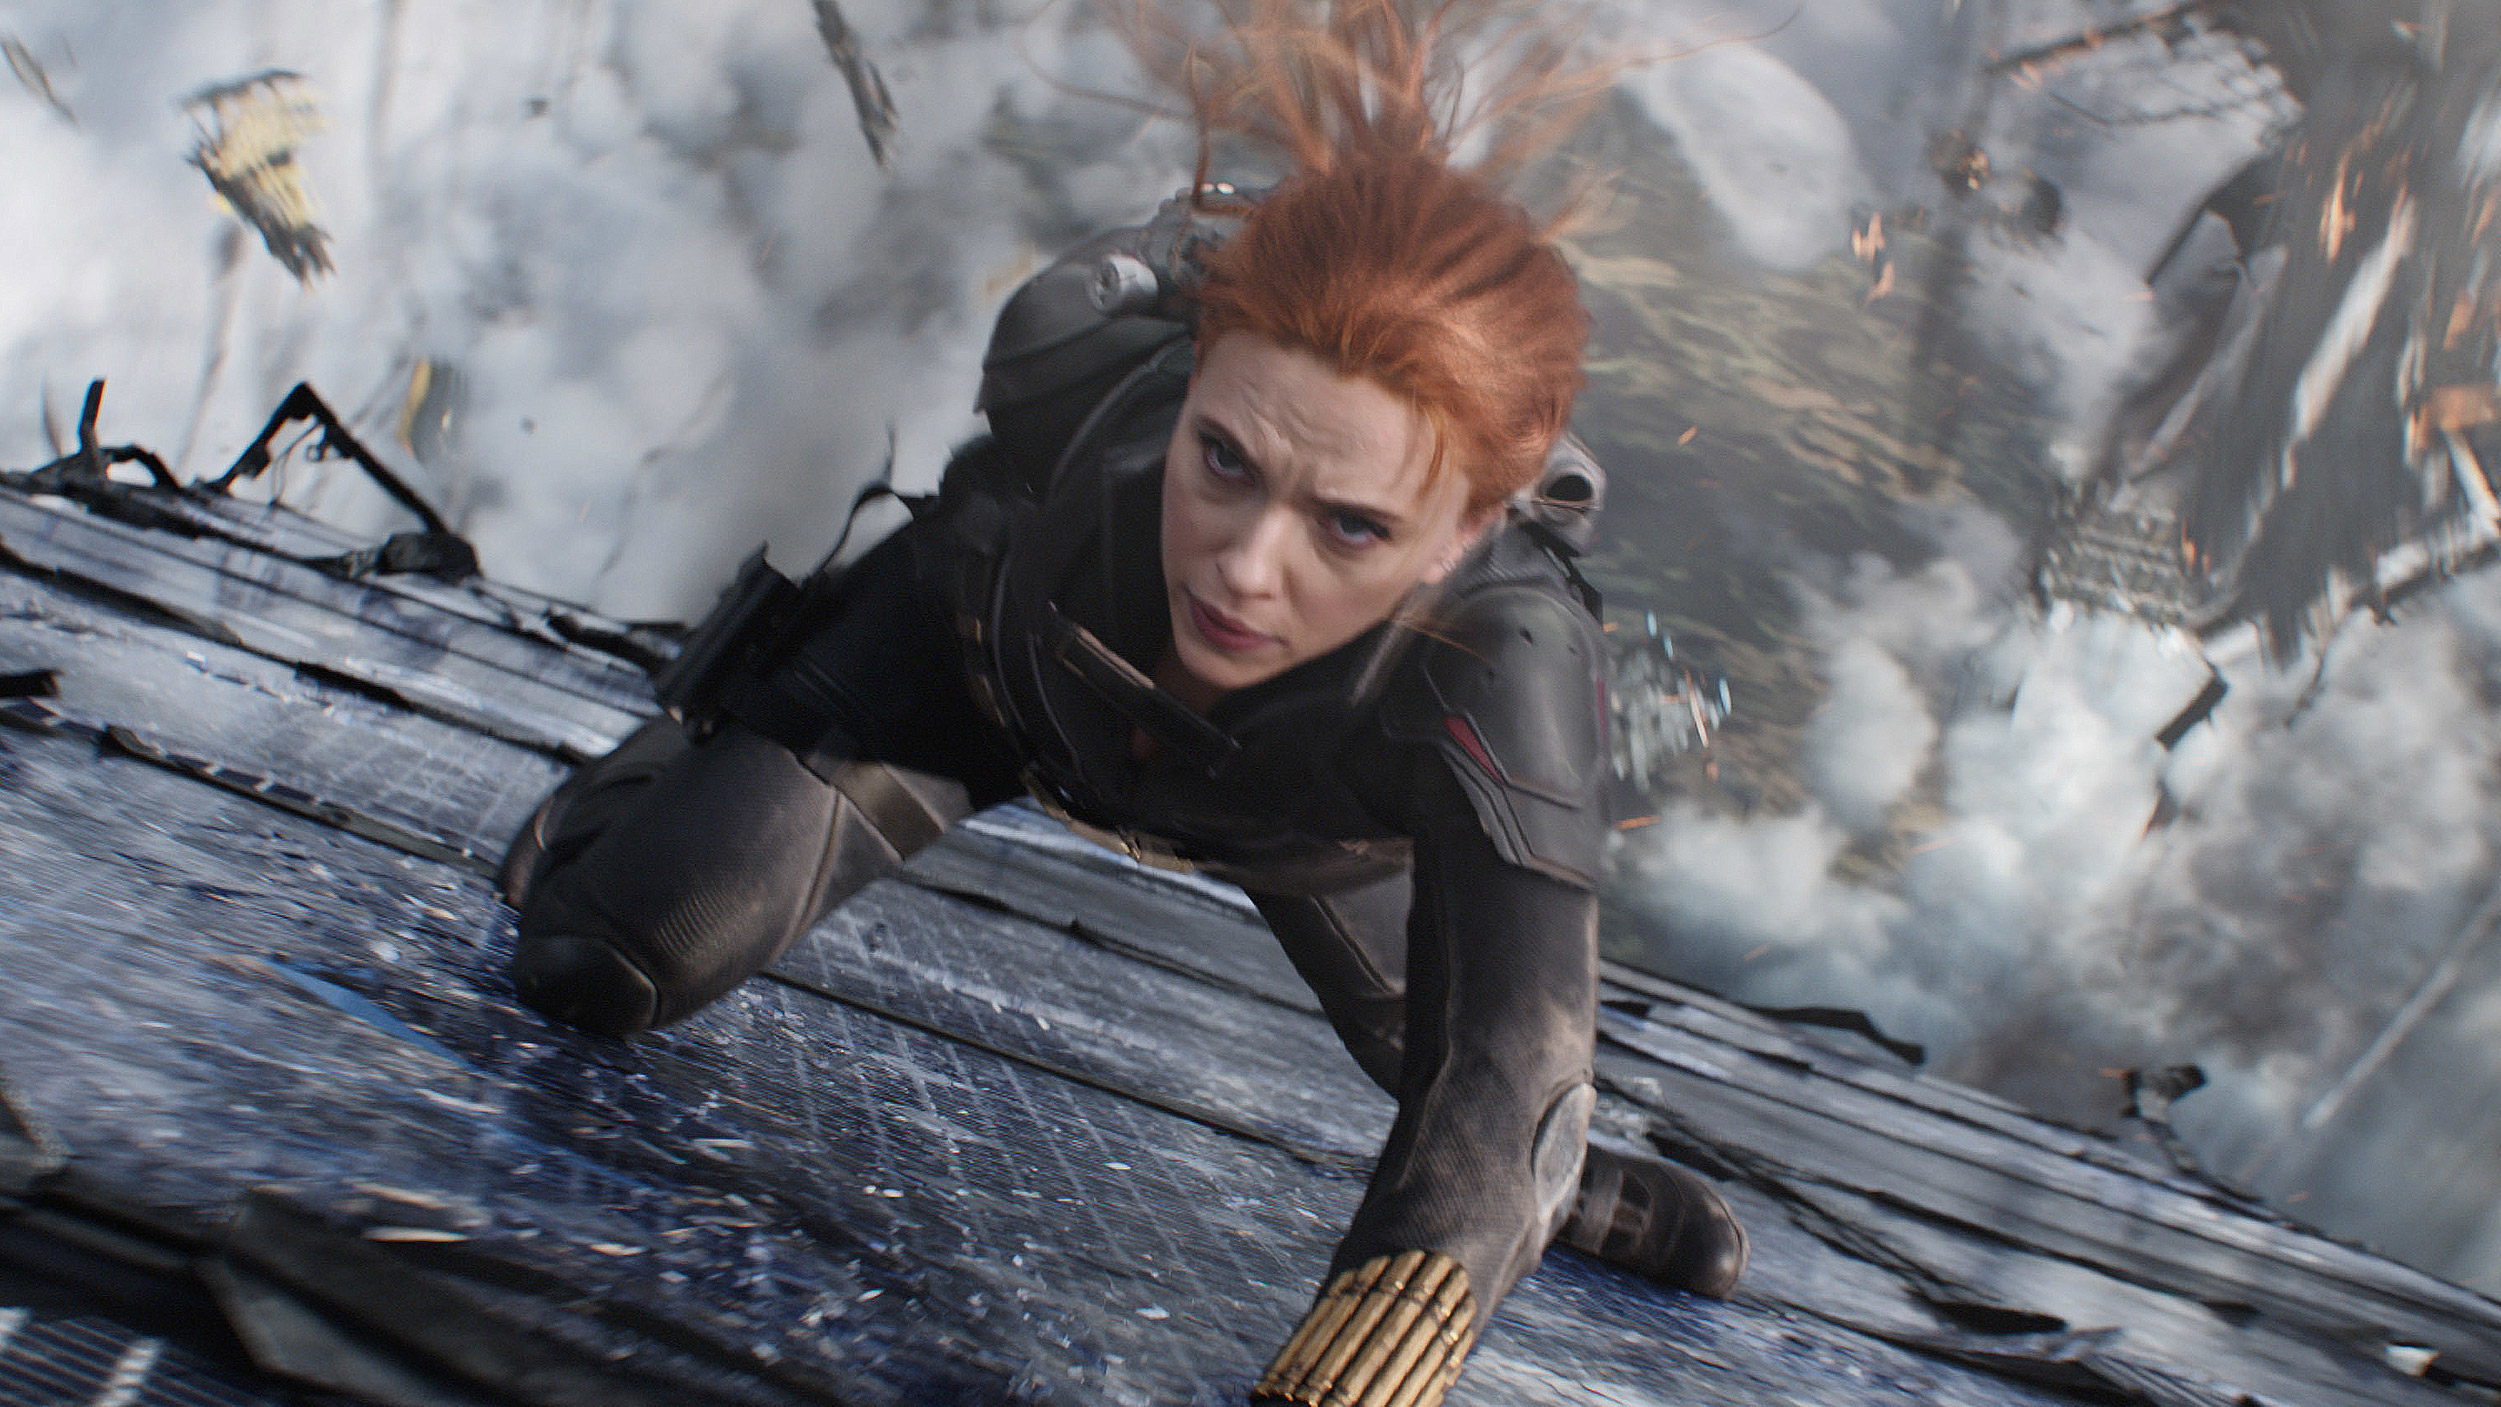 Art of the Cut: Spinning the Web of Black Widow’s Backstory